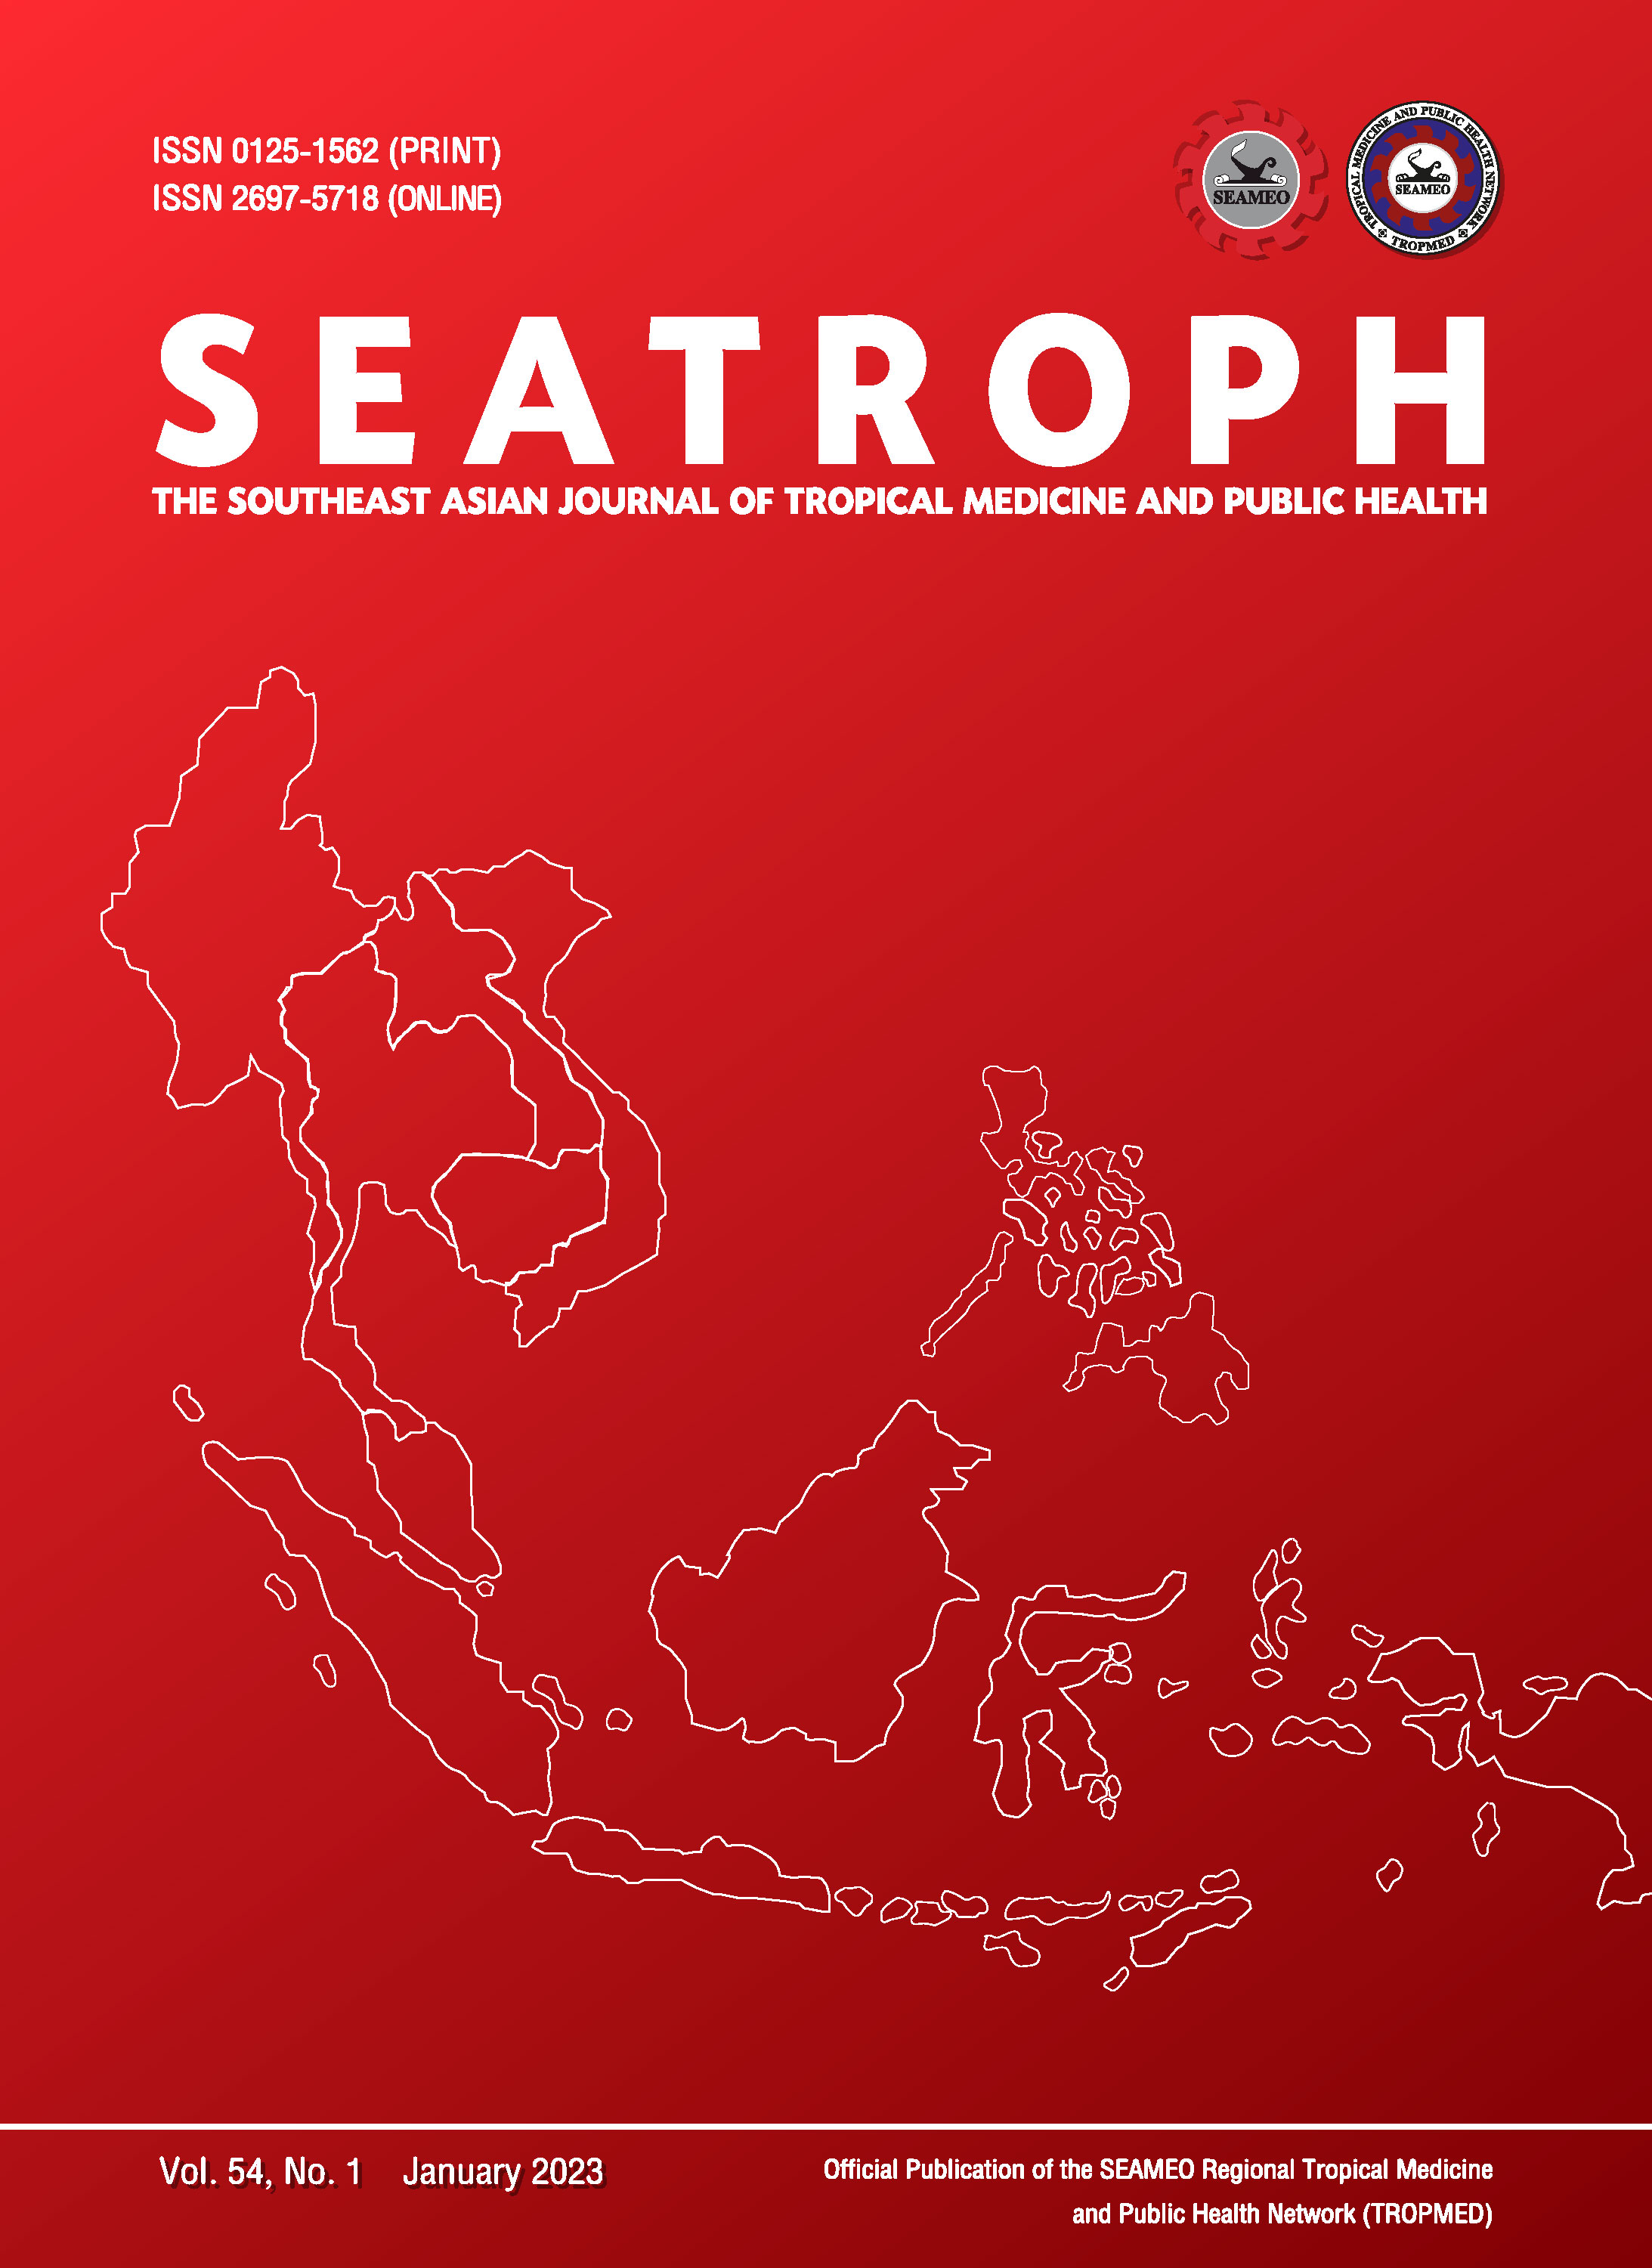 					View Vol. 54 No. 1 (2023): THE SOUTHEAST ASIAN JOURNAL OF TROPICAL MEDICINE AND PUBLIC HEALTH
				